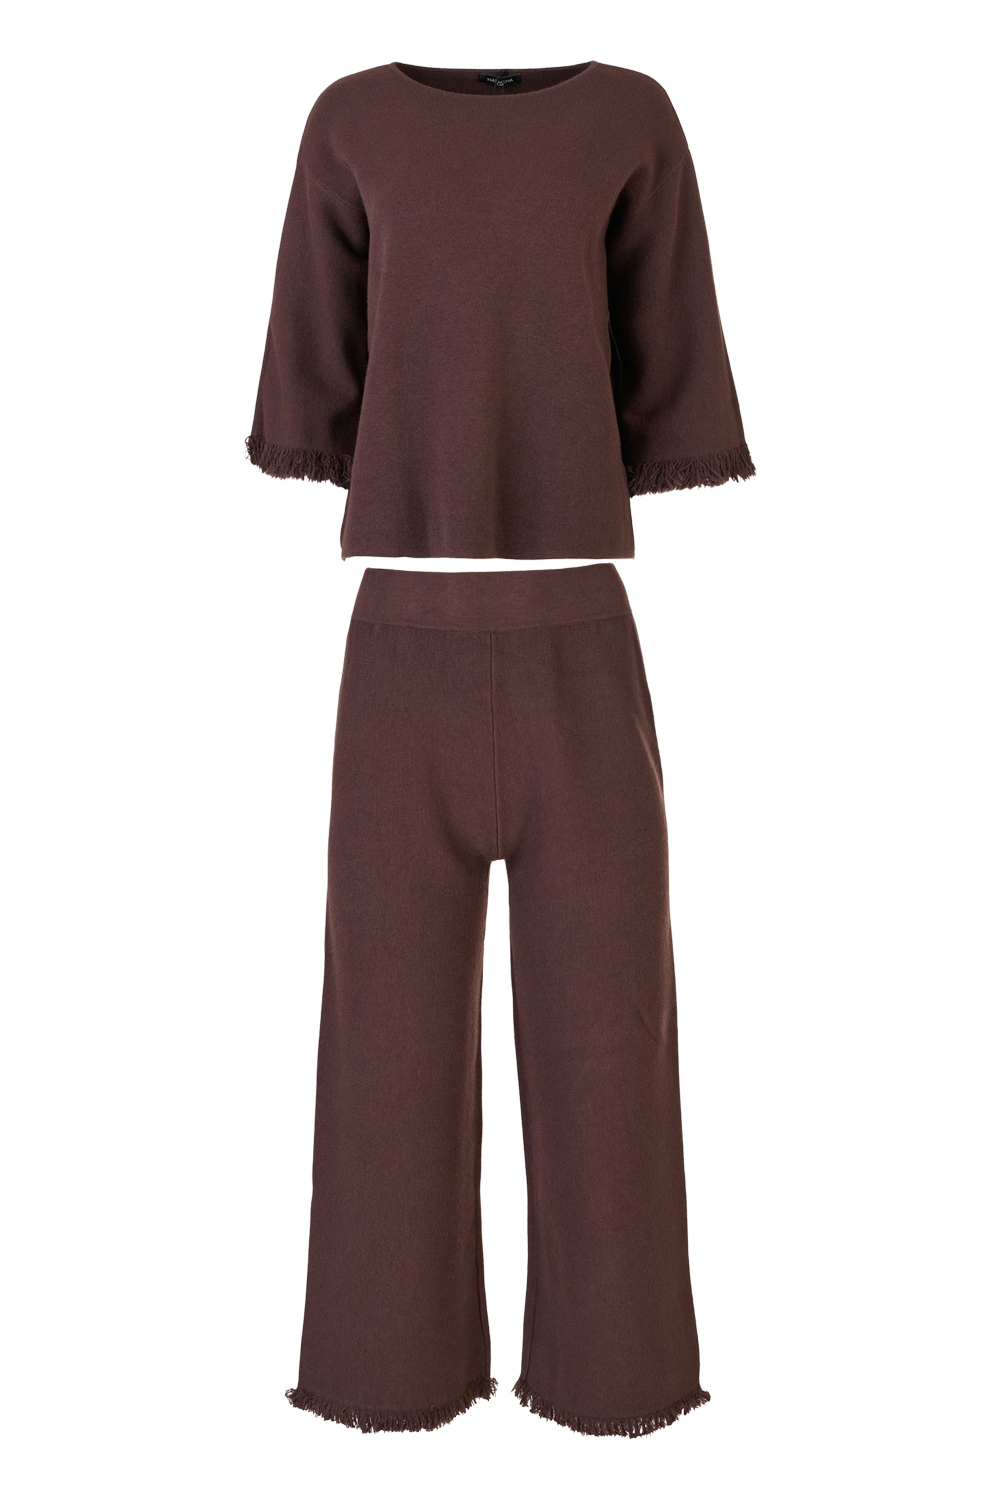 Cropped Woolly Jersey Trousers with Fringe and Elasticated Waistband (Natacha)